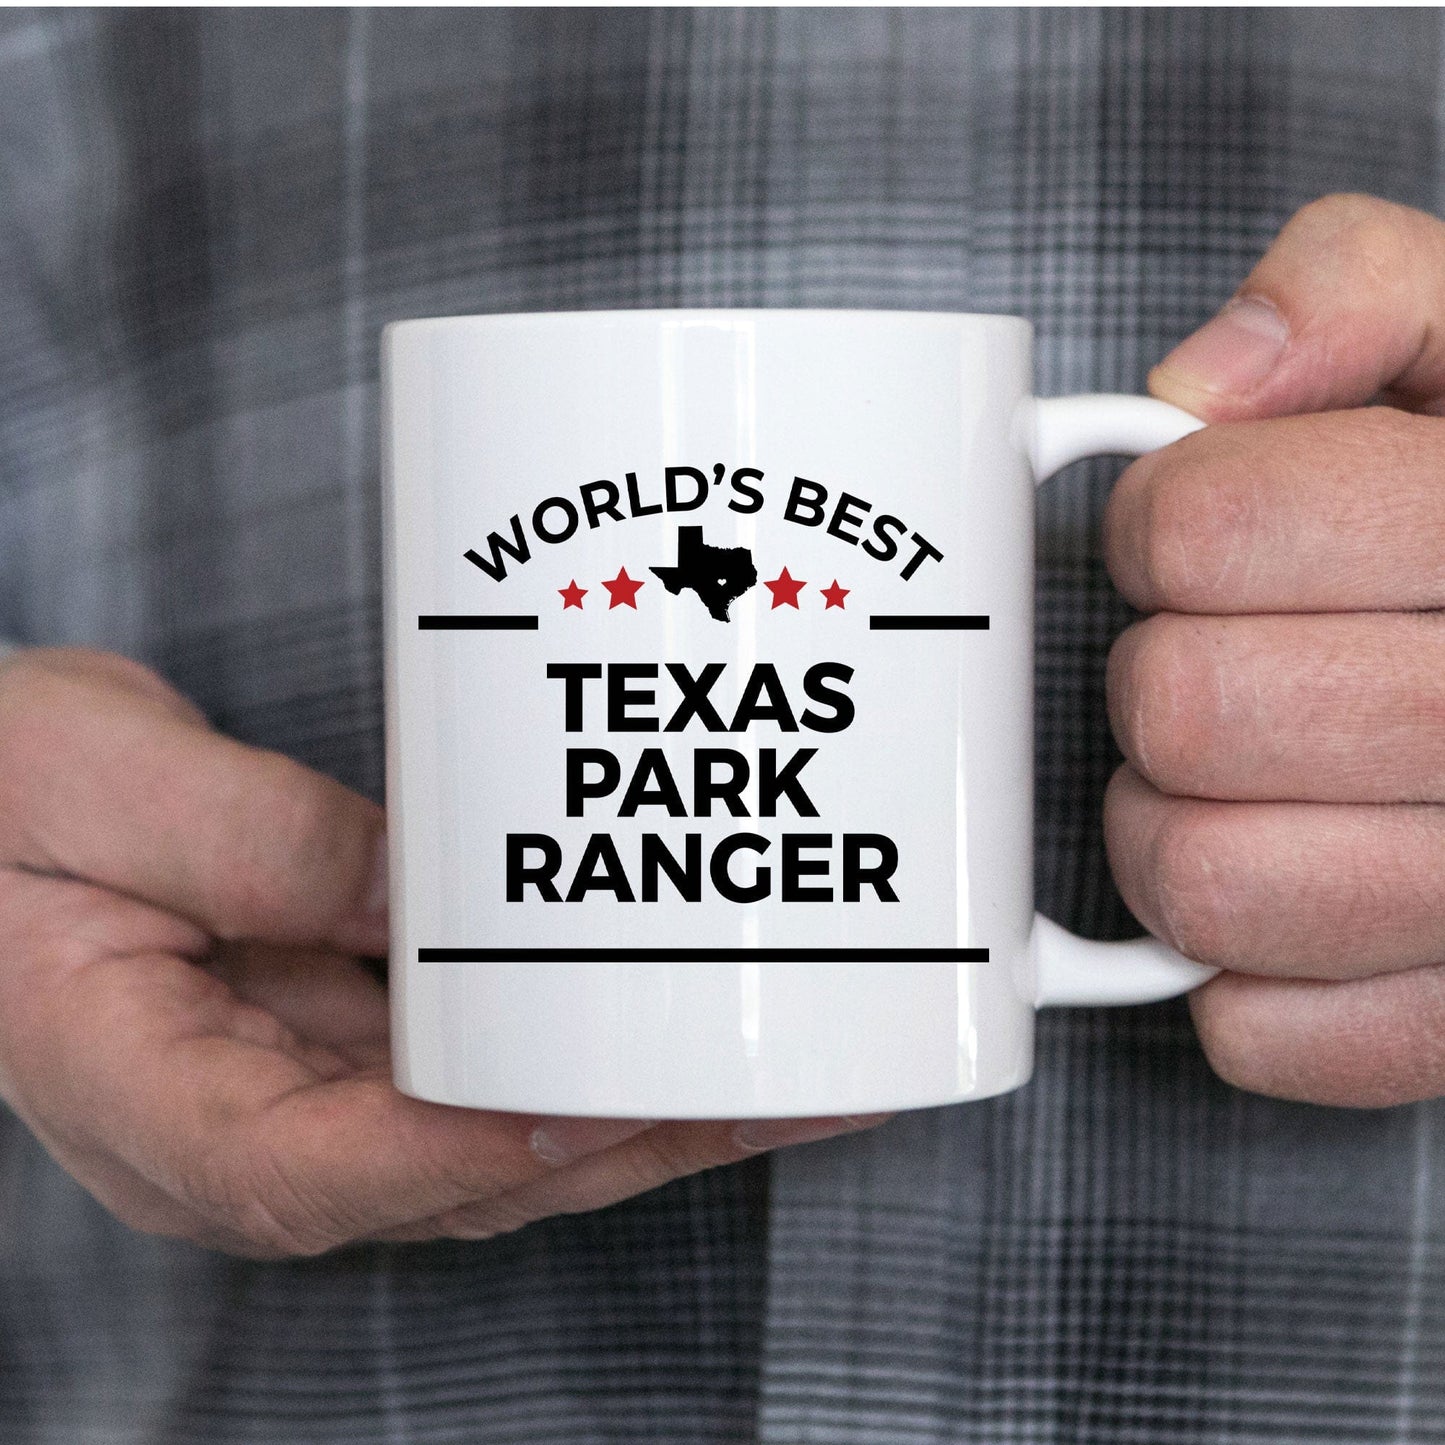 Texas Park Ranger Gift Birthday Father's Day Mother's Day Appreciation White Ceramic Coffee Mug